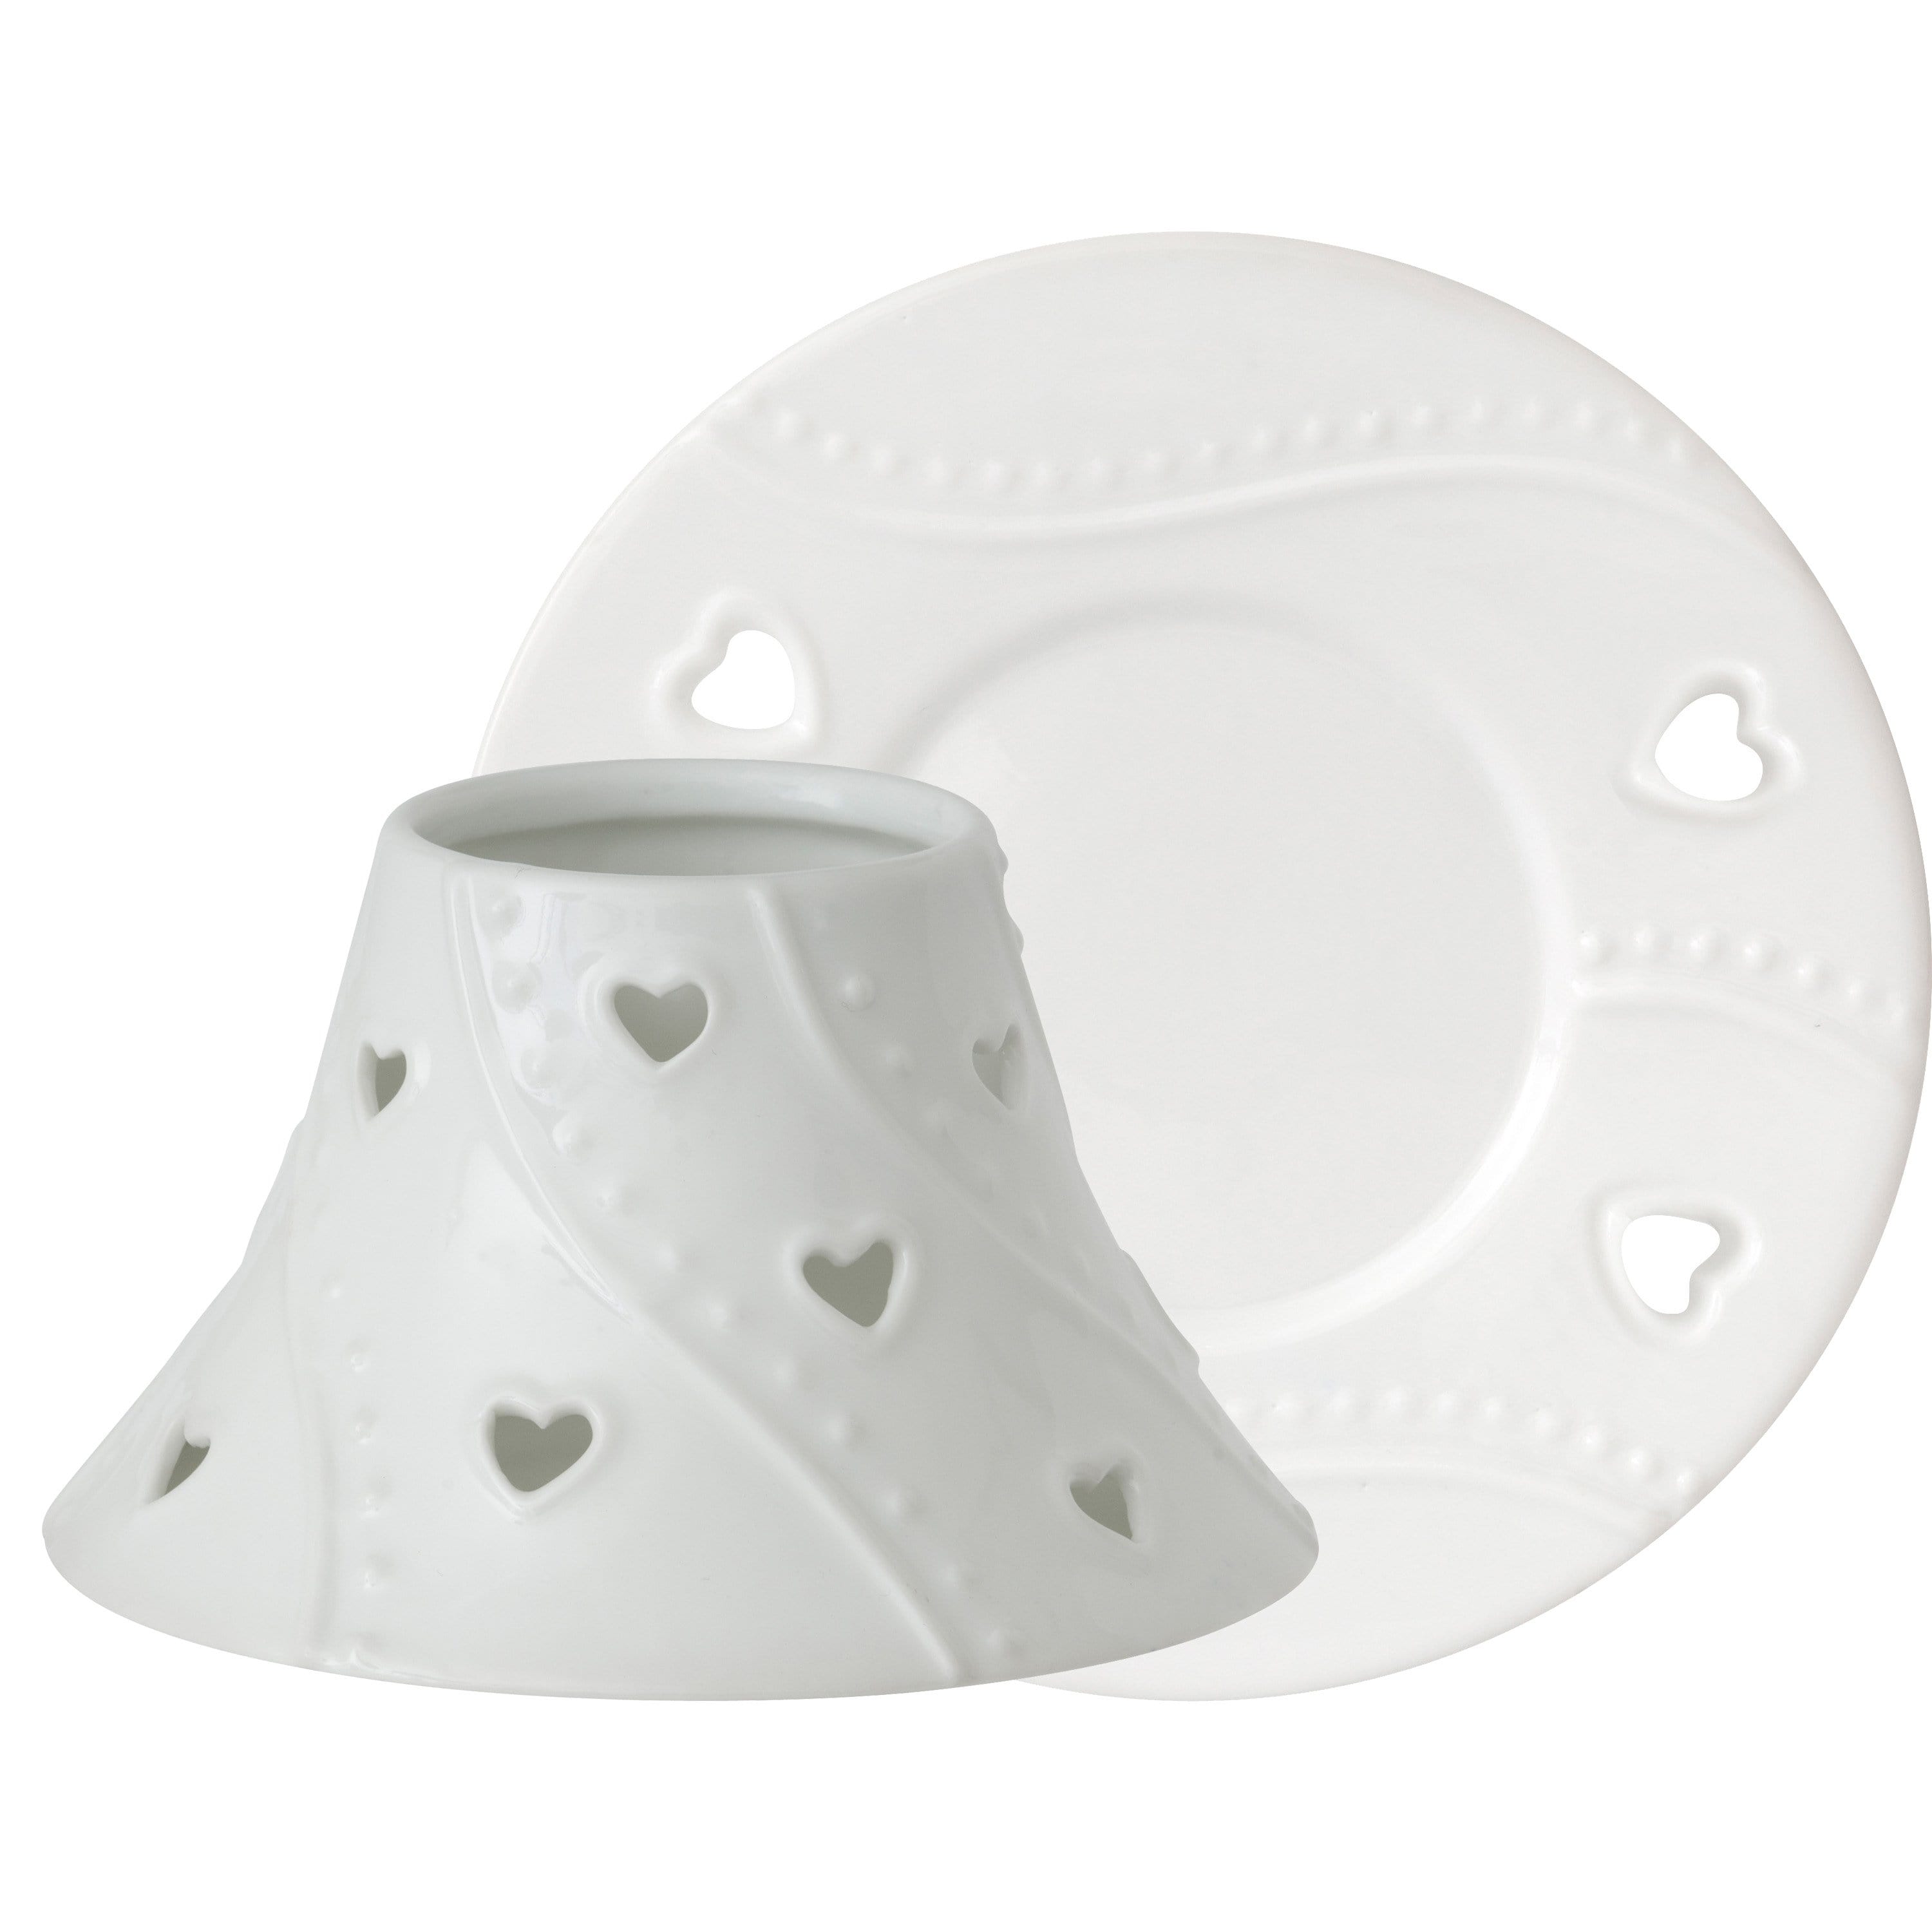 Yankee Candle Small Shade & Tray Yankee Candle White Heart Accessories (Small Shade & Tray)